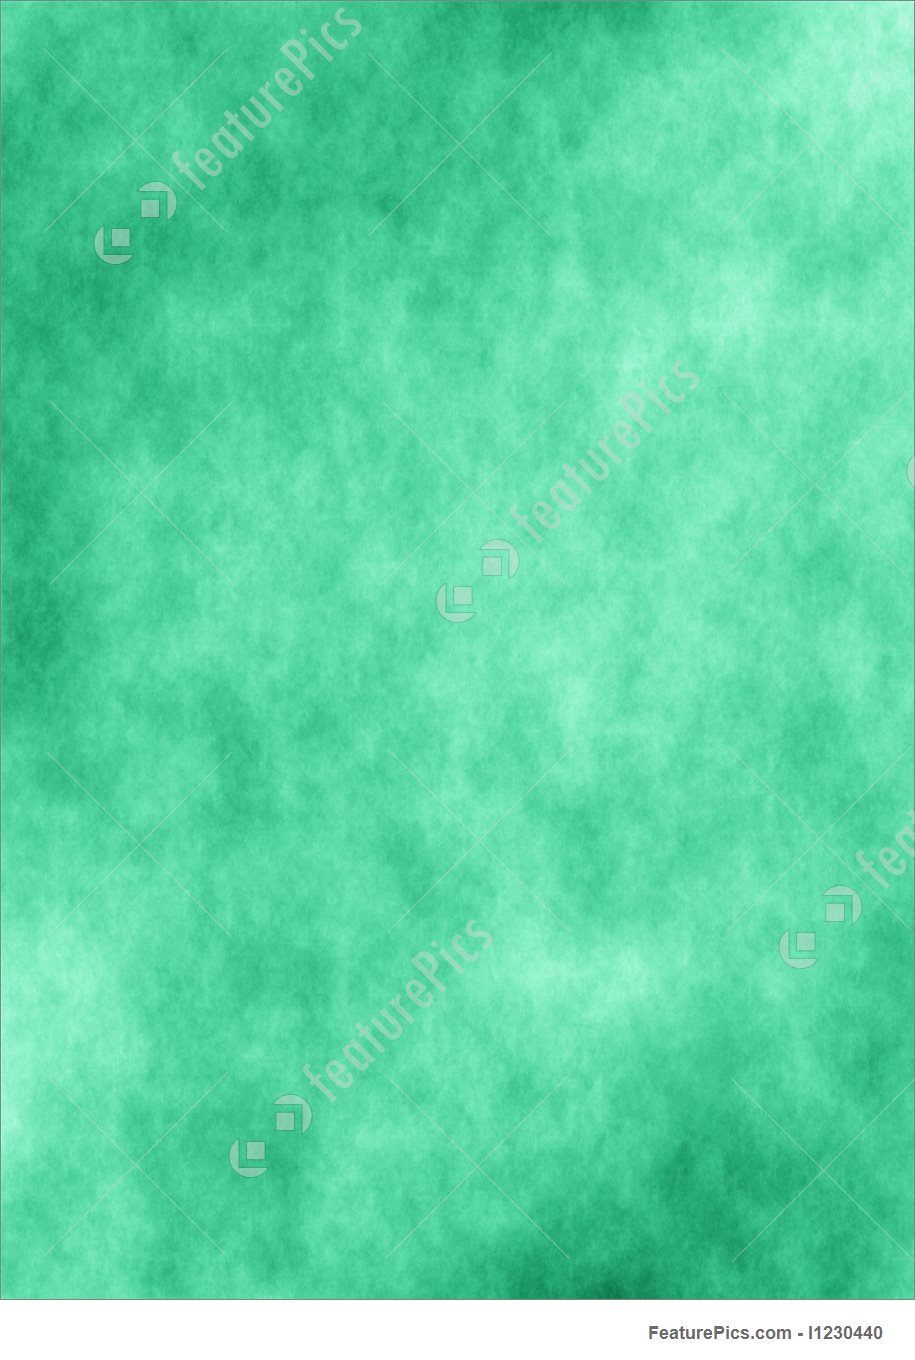 Simple Light Green Paper Suitable For Background Wallpaper - Light Green  Grunge Background - 915x1360 Wallpaper 